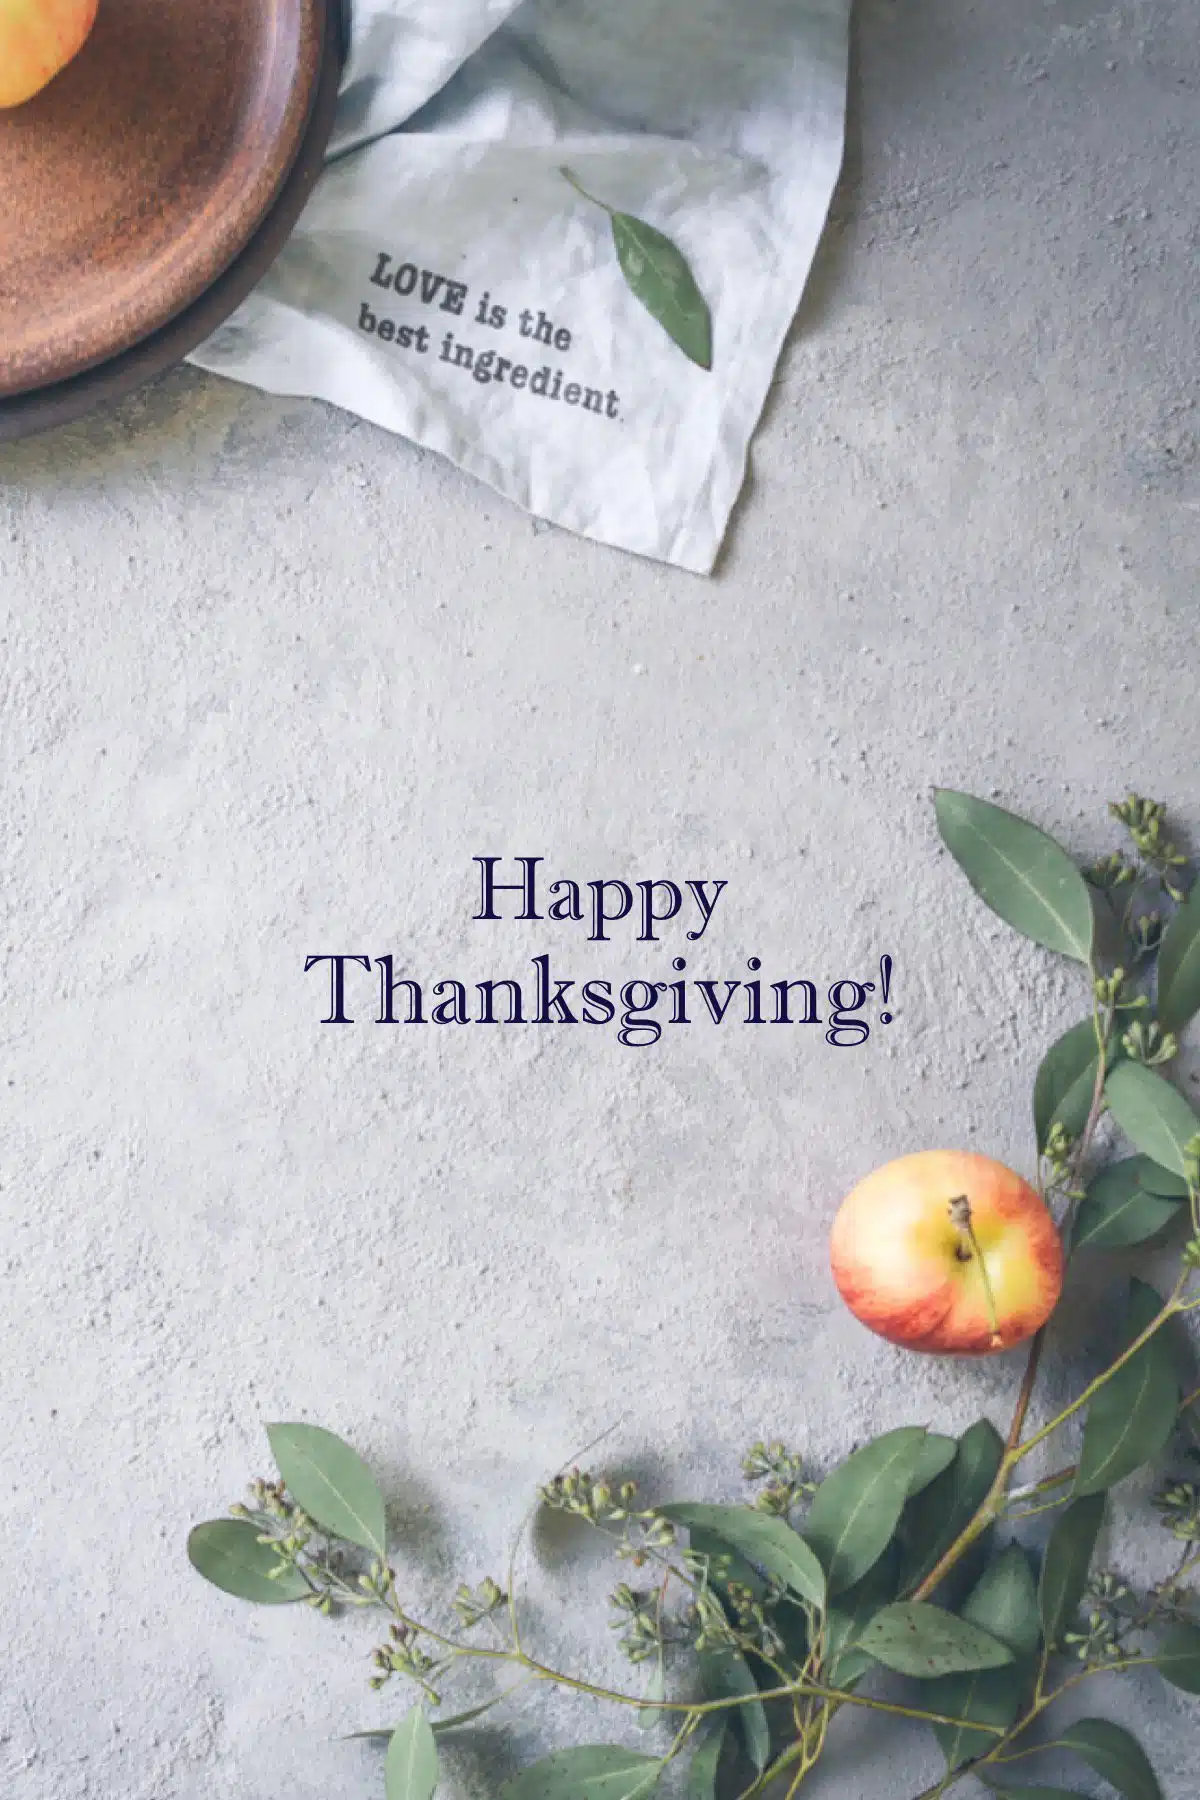 Thanksgiving is our favorite holiday and we tell you why in our latest post